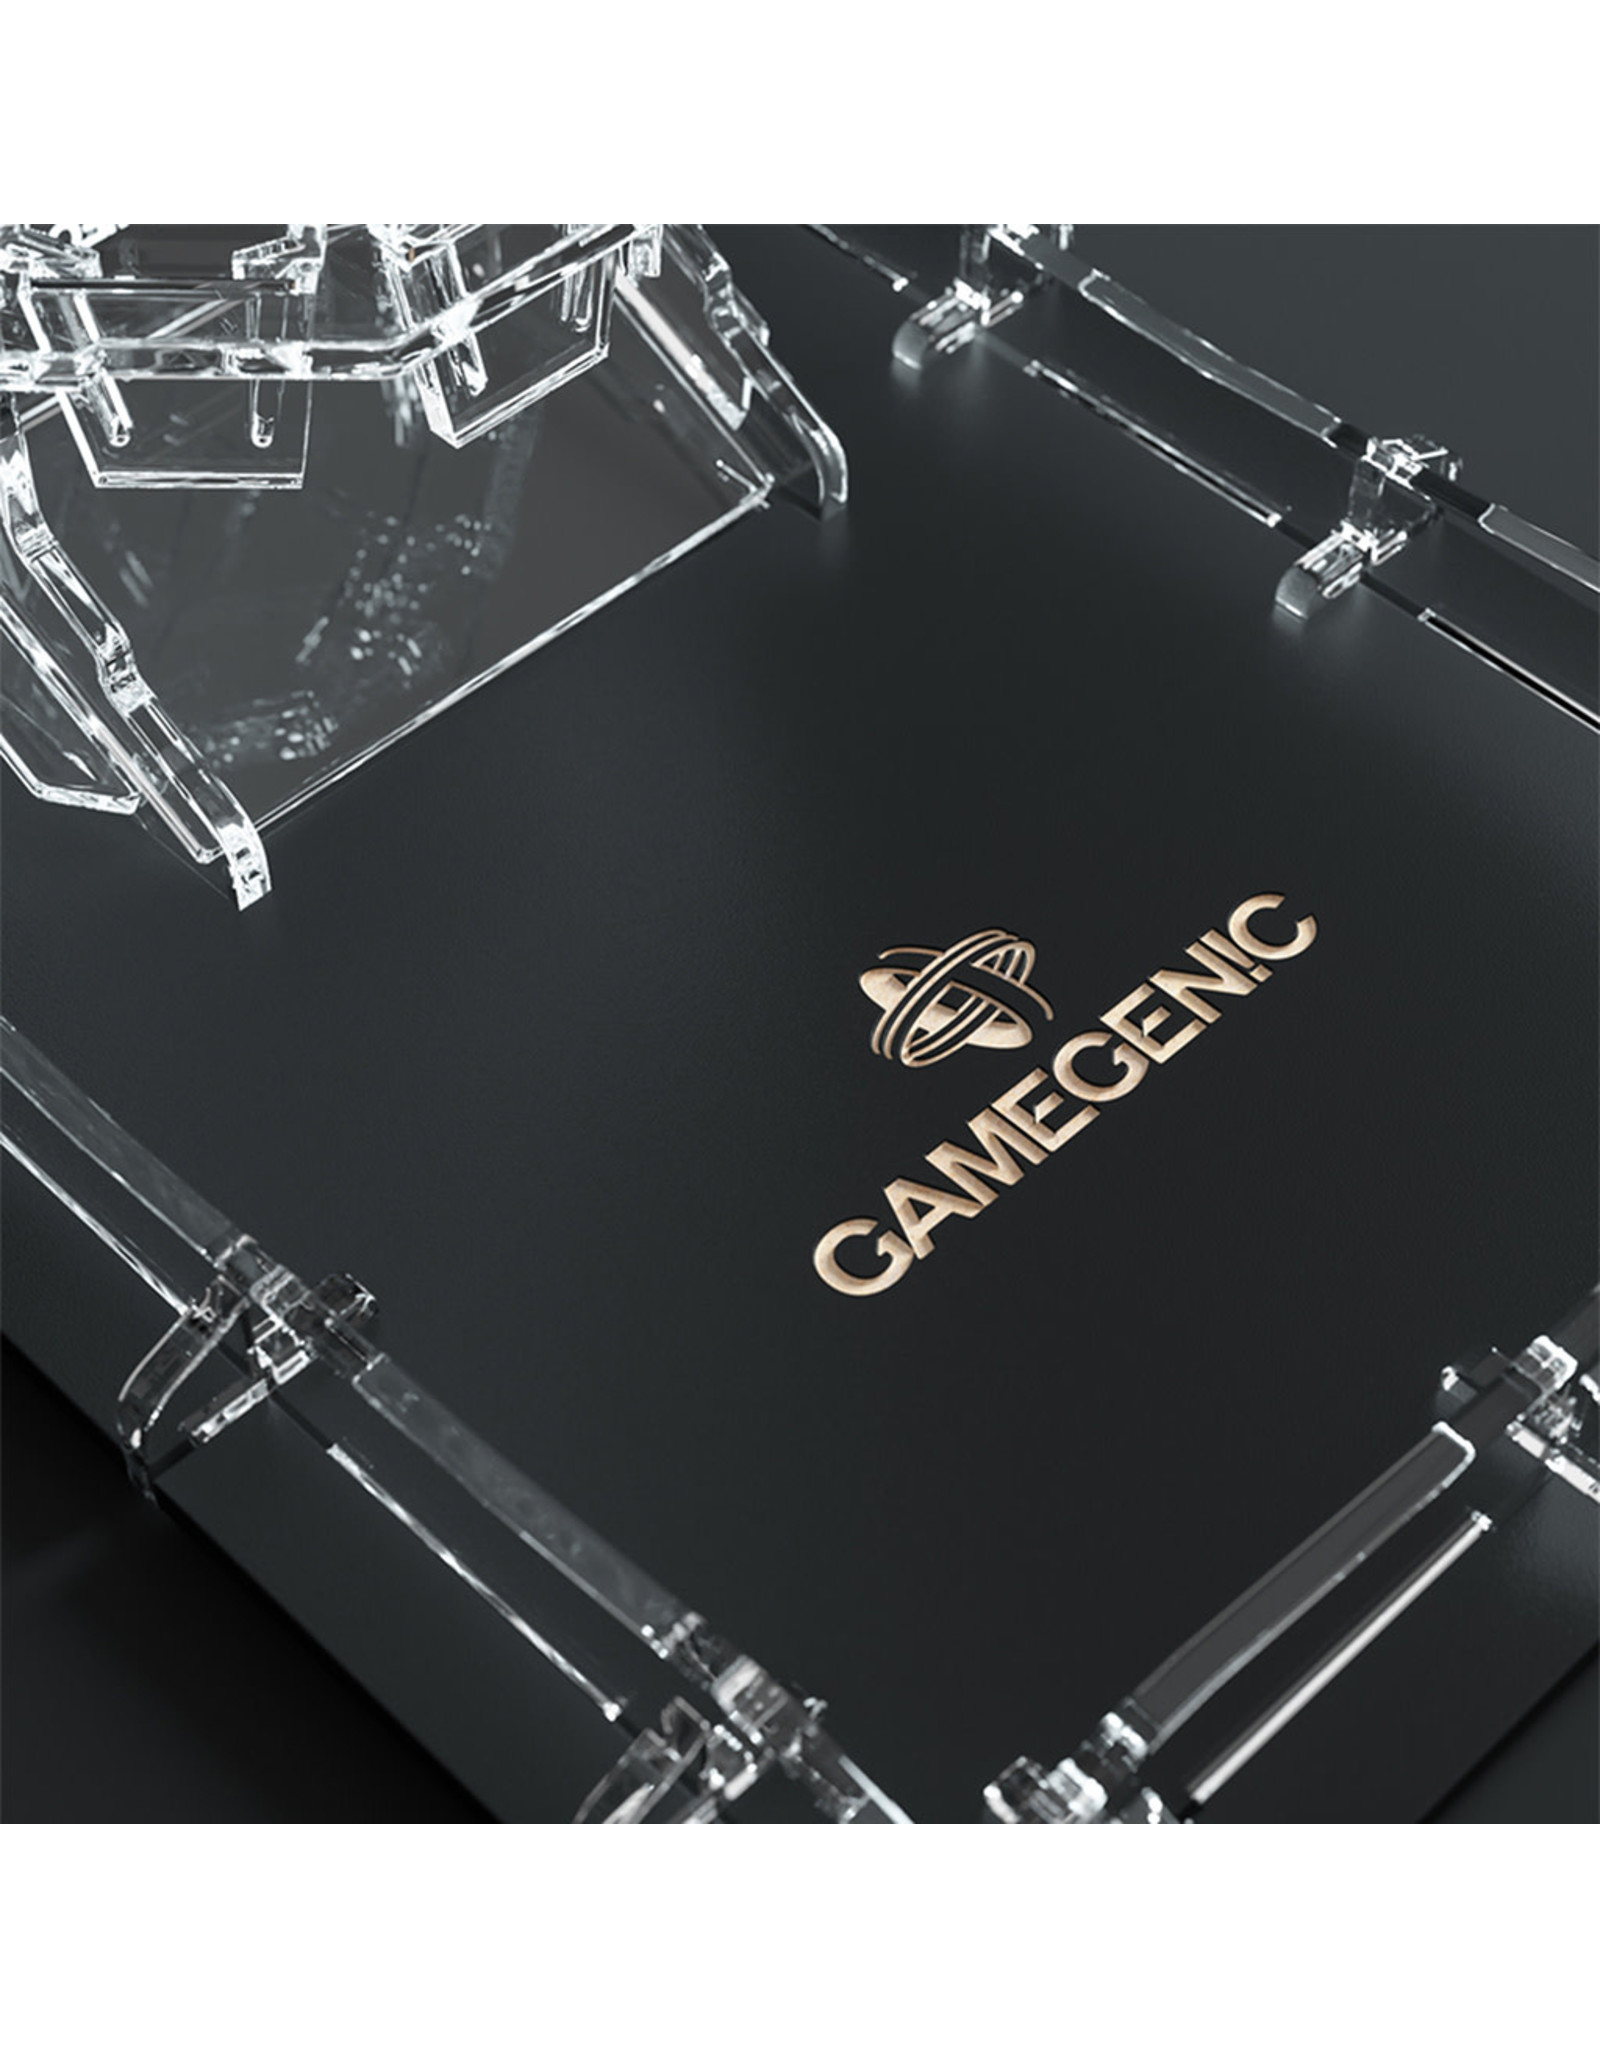 GameGenic Crystal Twister Premium Dice Tower